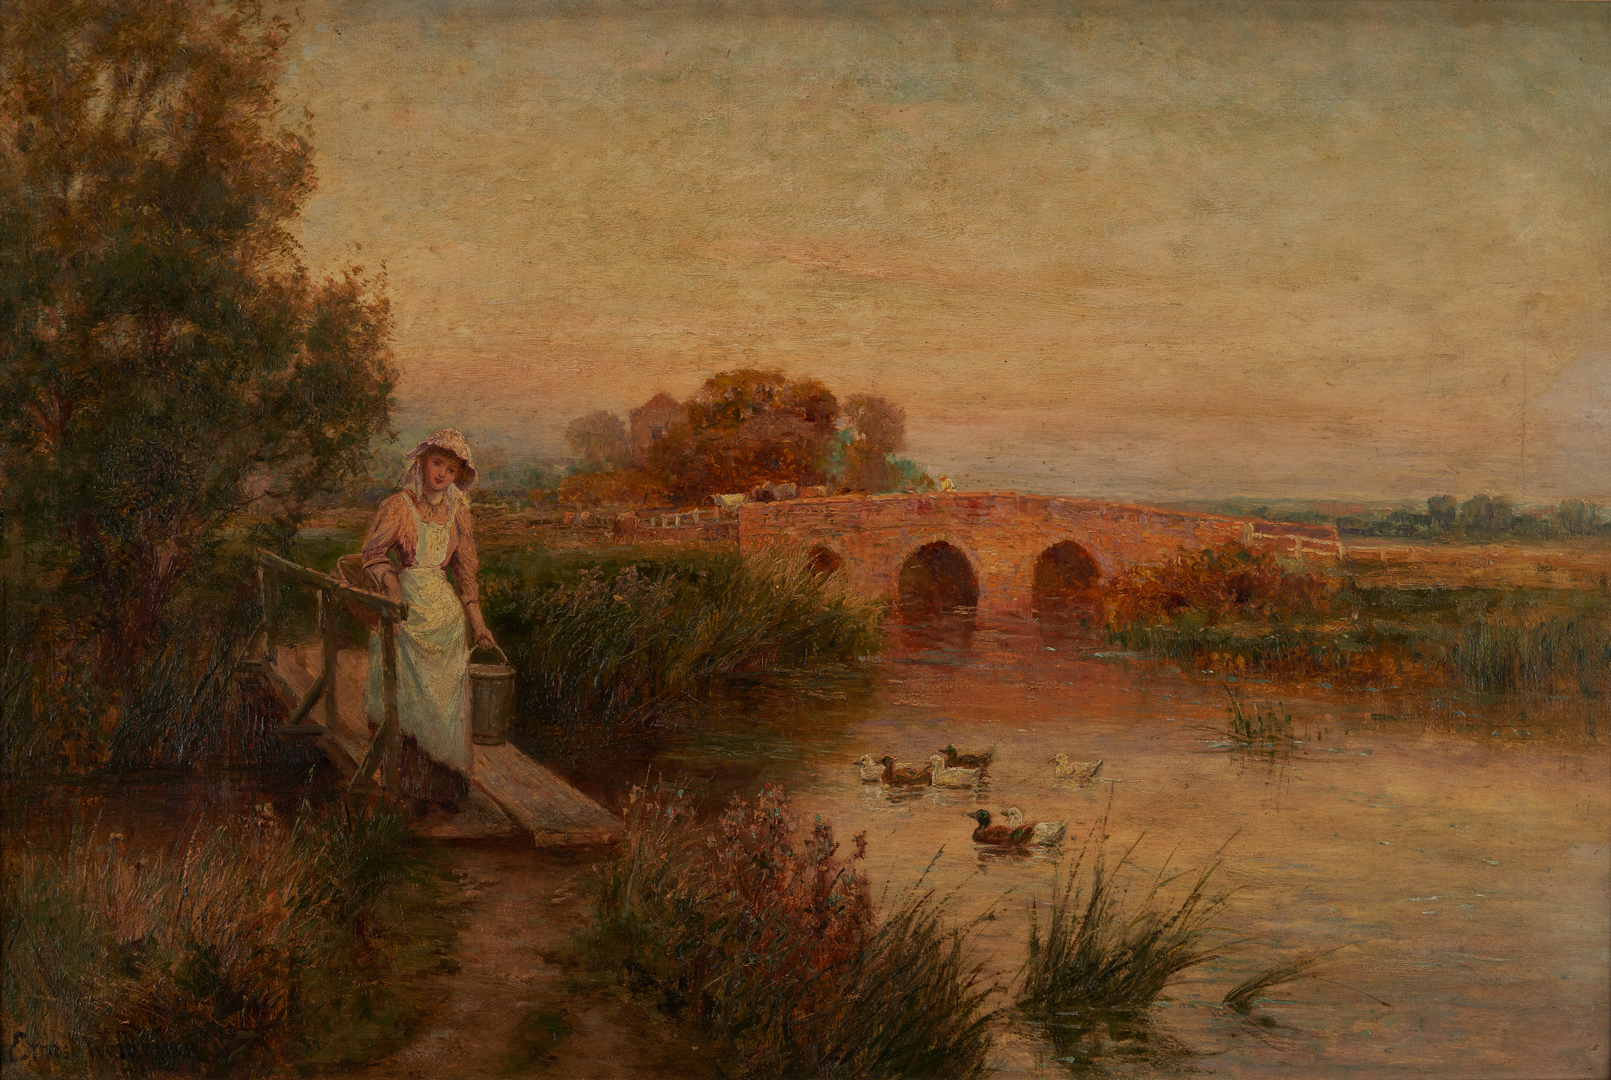 Lot 116: Ernest Walbourn O/C, English Landscape with Figure and Ducks